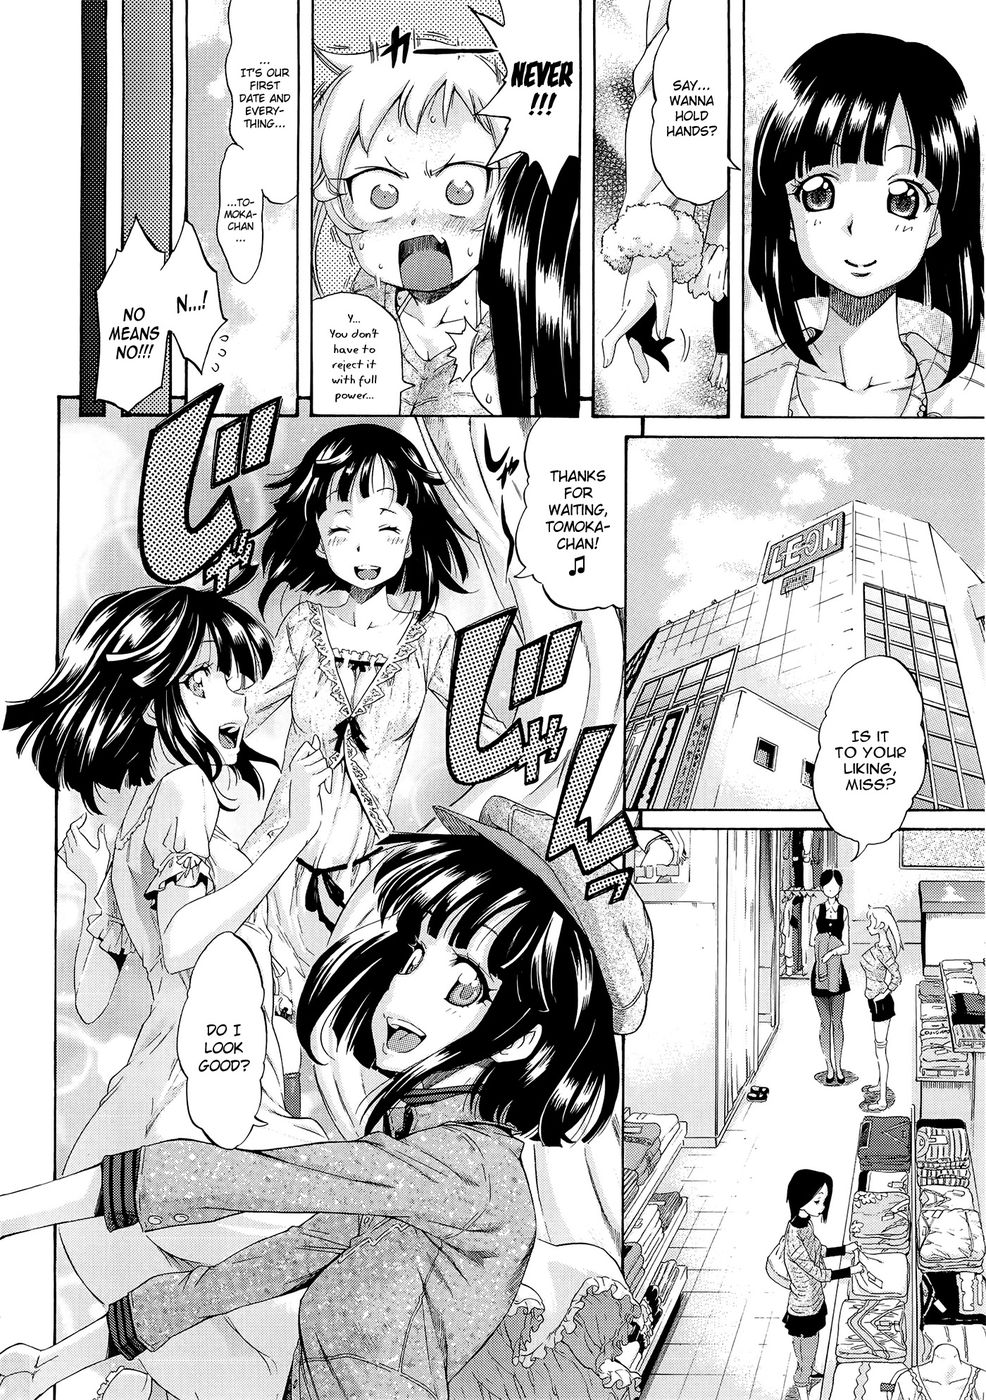 Hentai Manga Comic-Melody-Chapter 3-Cry For The Moon Relationship 2-2